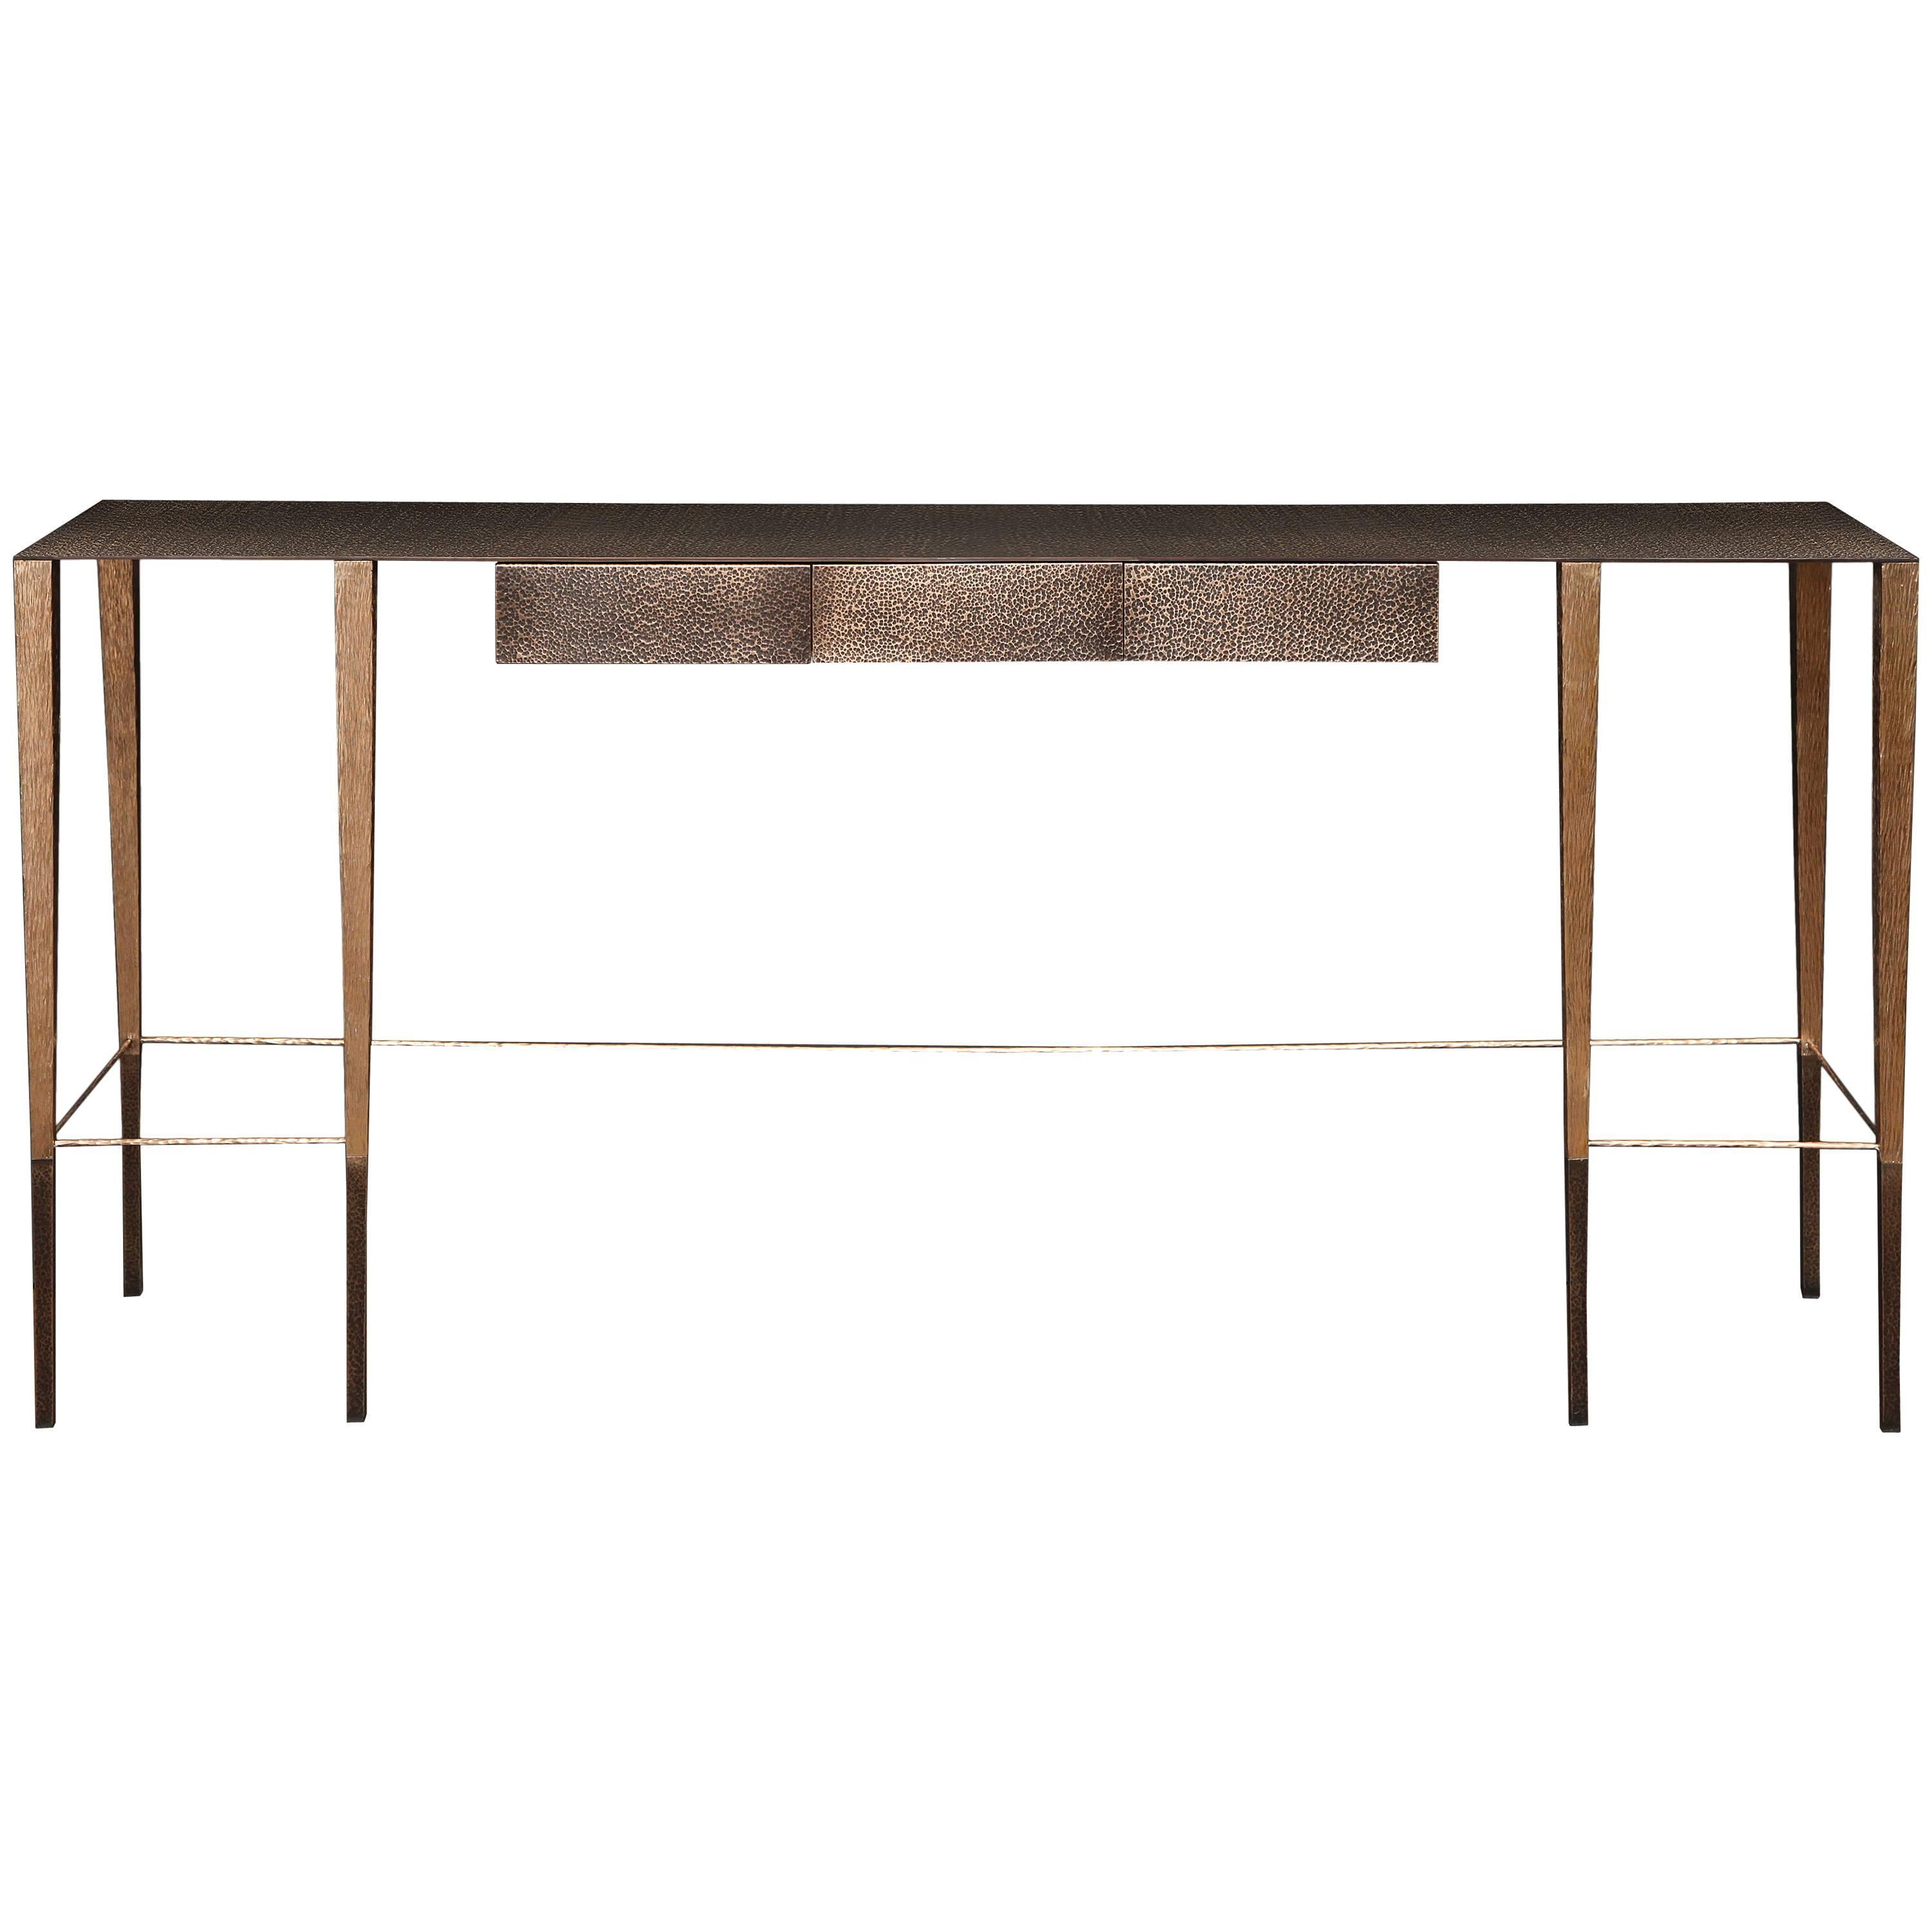 "Singha" Hand-Hammered Bronze Console Table by Aurelien Gallet For Sale